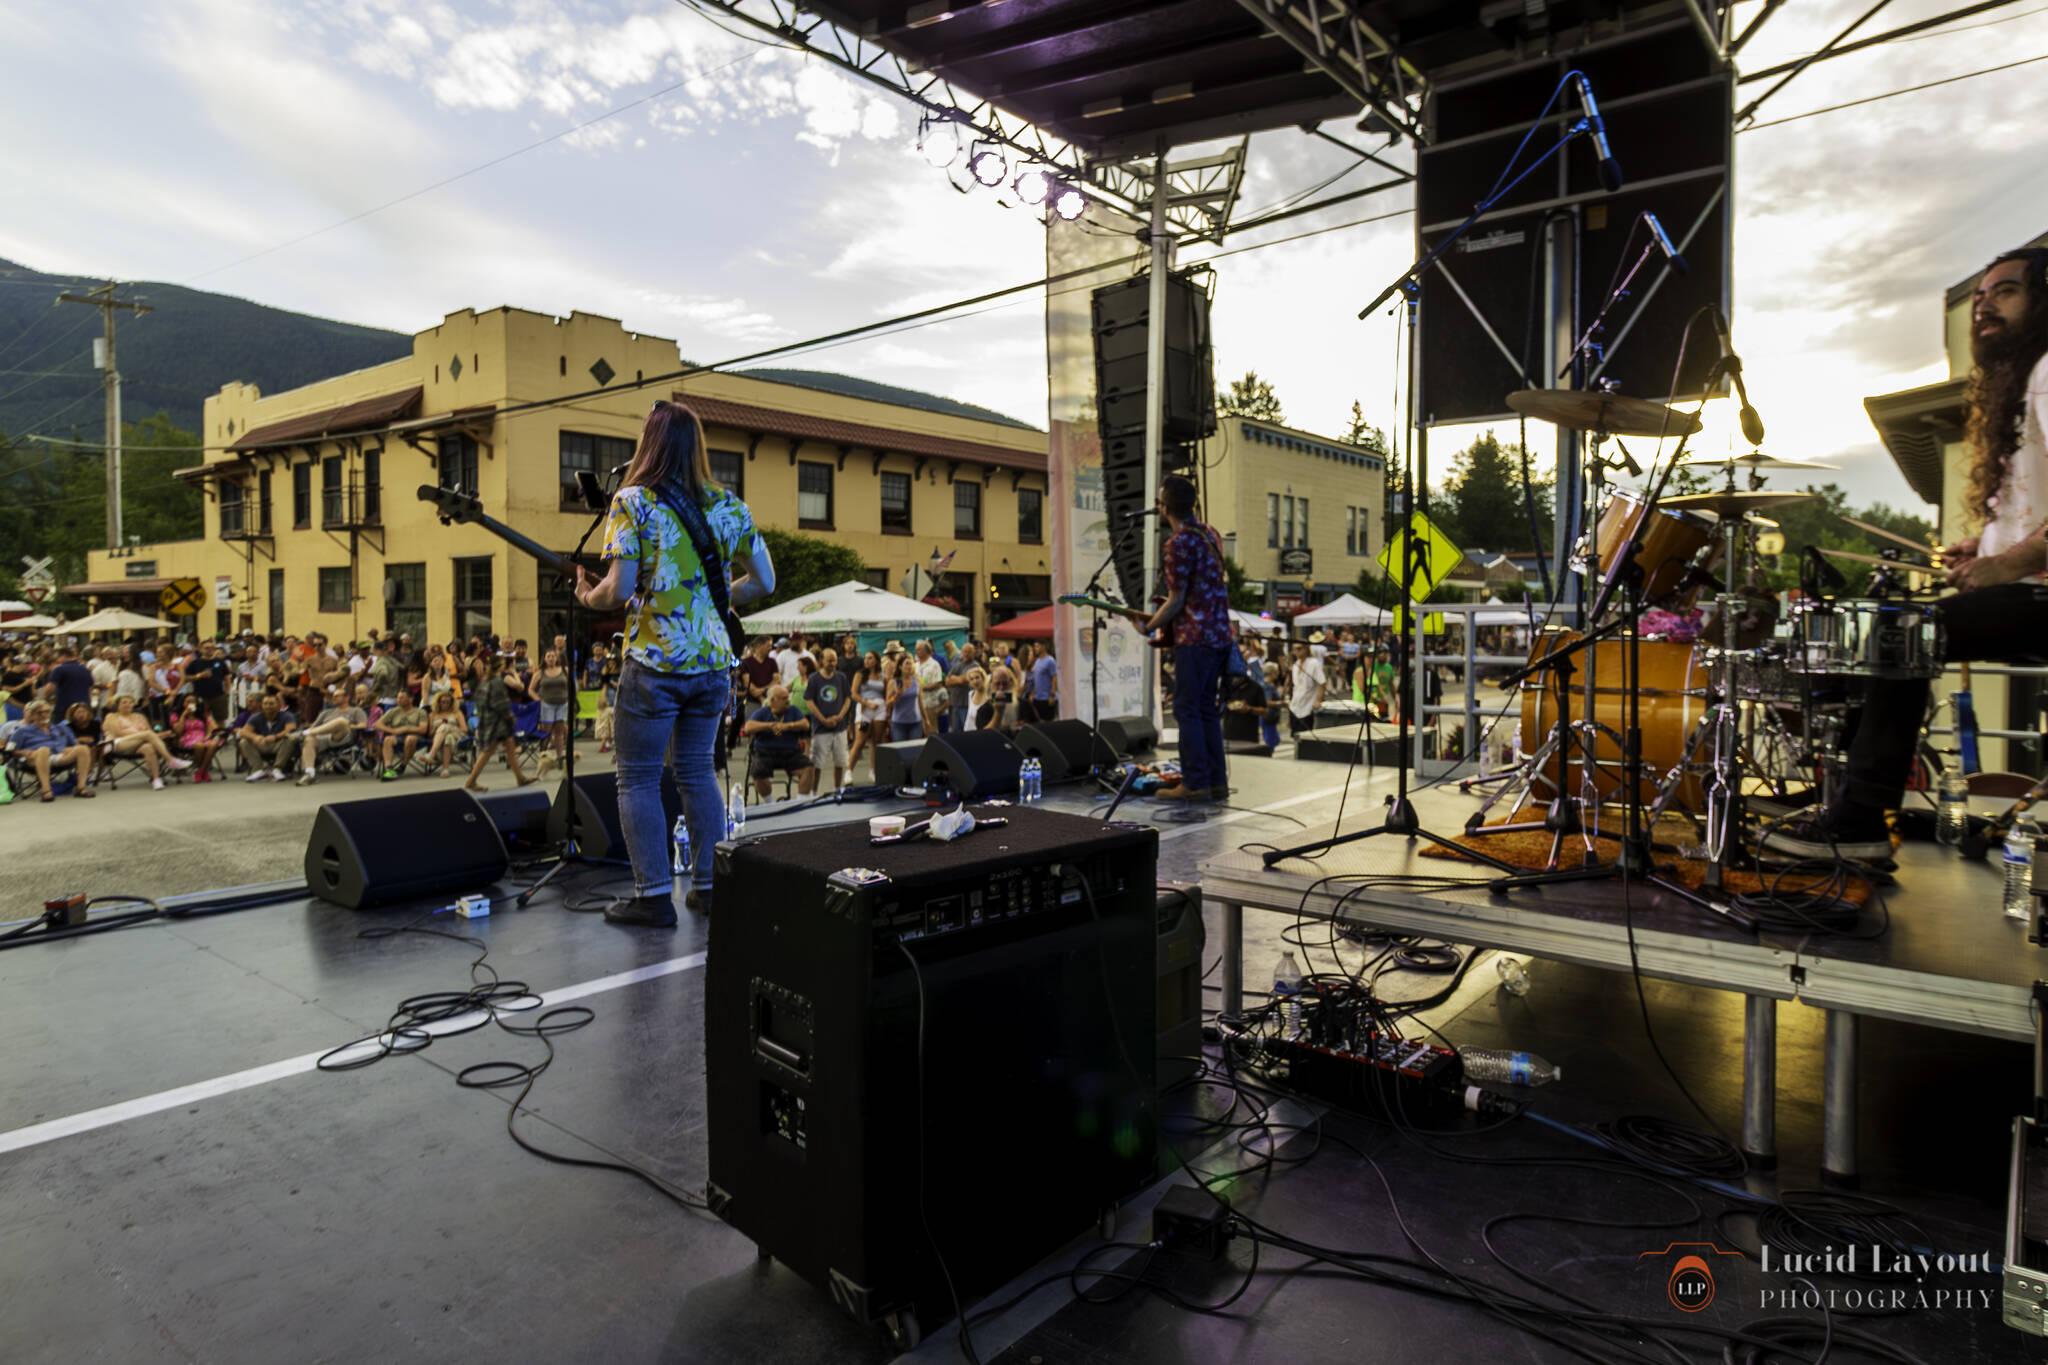 Nick Mardon performs at North Bend Block Party on July 15. All photos Courtesy of Lucid Layout Photograhpy.